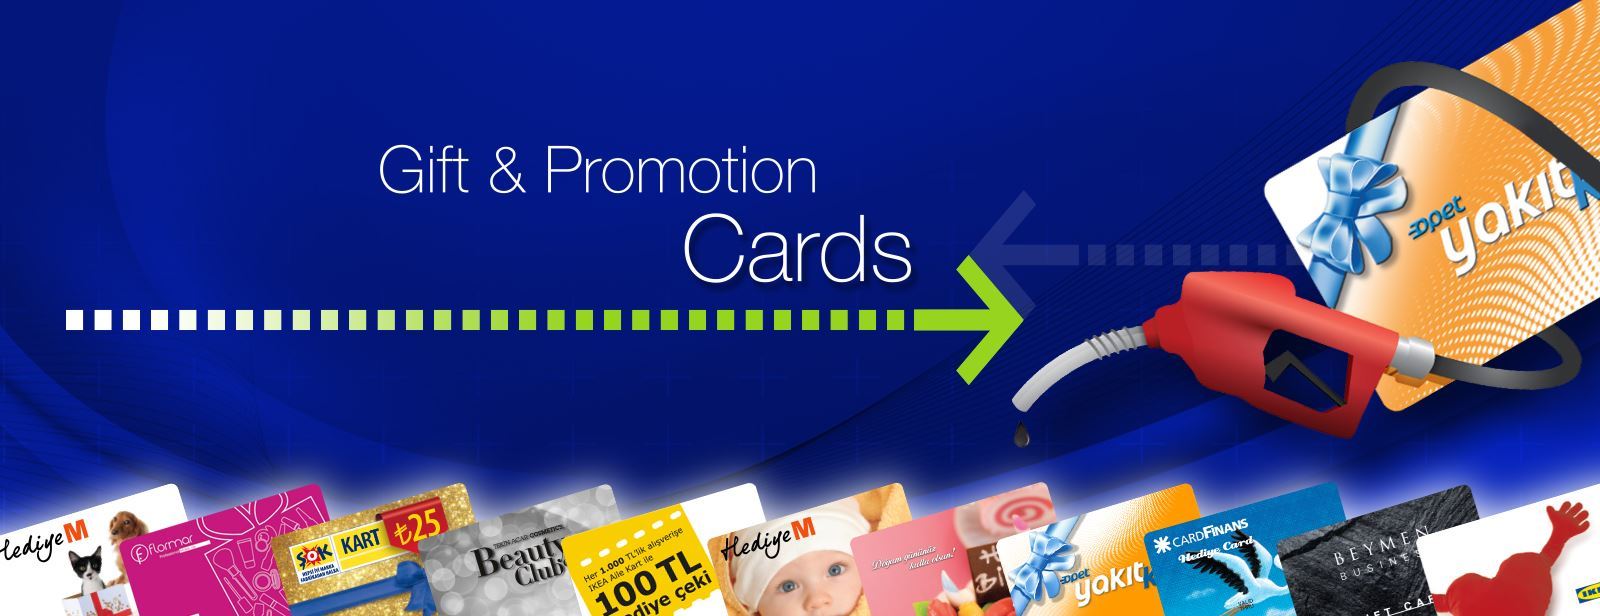 Gift & Promotion Cards